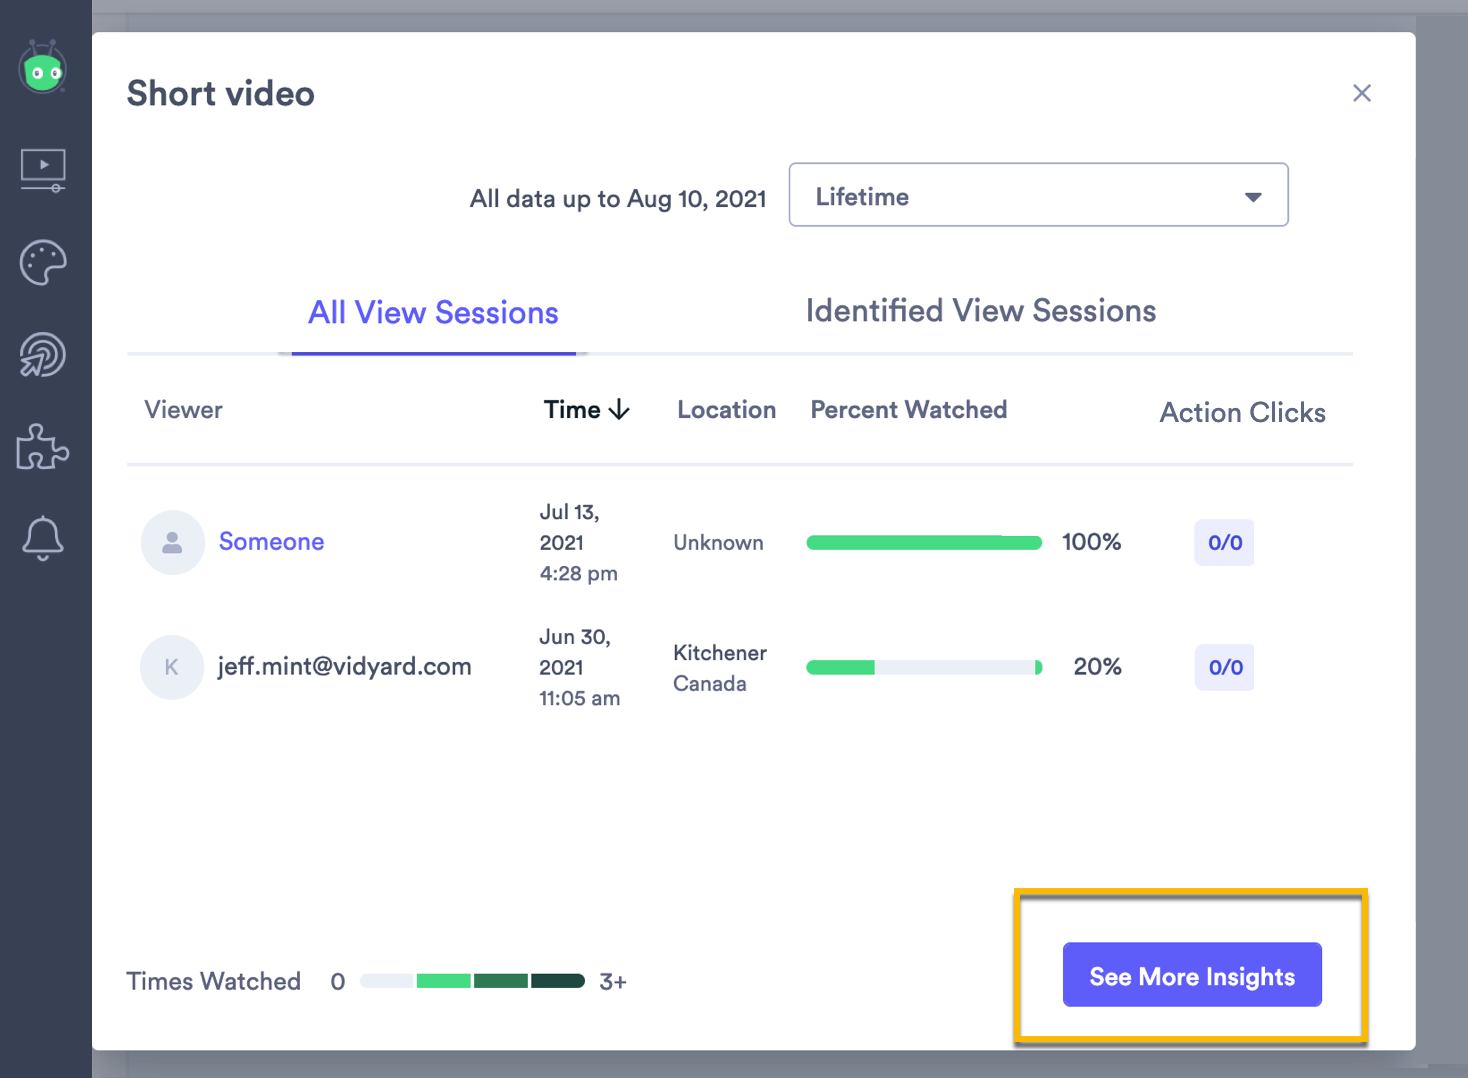 Vidyard Video Insights screen, showing viewing session information